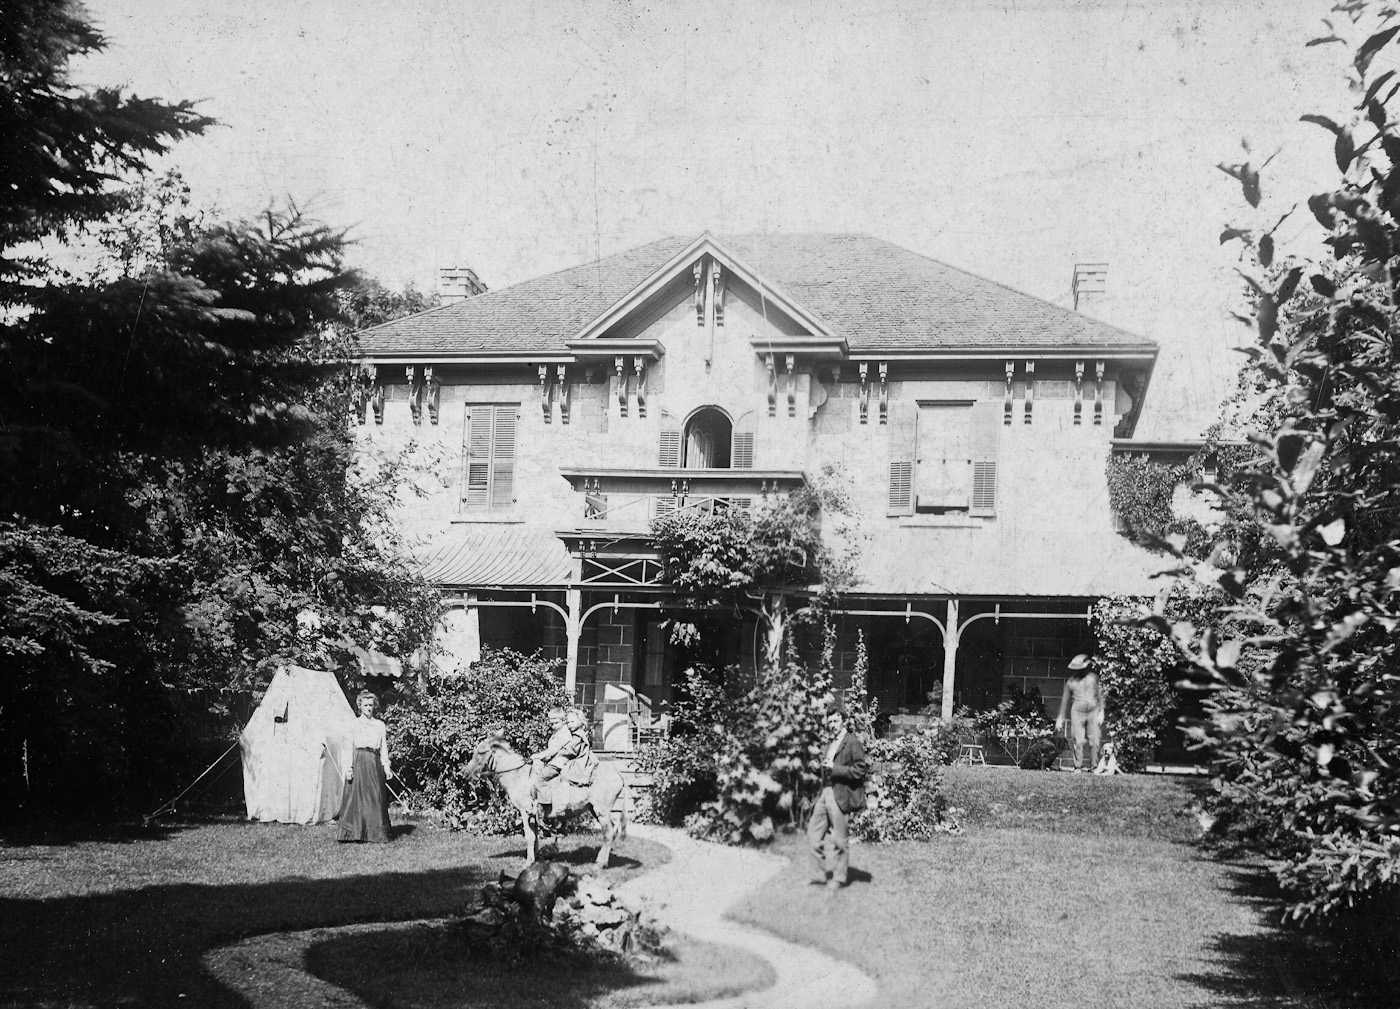 This is the house of Dr. George Devey Farmer, in Ancaster, Ontario, taken about 1905. In the photo are Dr Farmer, his wife (and first cousin) Eleanor Shelton Farmer, and two of their four children - George Richard Devey Farmer and Margaret Alice Devey Farmer - sitting on Balaam the donkey. To the right is Collinson, with the dogs.  

The house was built about 1873 for Dr. Richardson, and still stands at 343 Wilson Street, Ancaster, although shorn of its veranda and fountain.  

The Farmer family (Dr. Farmer's grandfather) arrived in Ancaster in the 1850s, having arrived in Canada twenty years before, from Brockton House, near Shifnal, Shropshire. All their possessions were loaded into a chartered 430 ton sailing ship - the Kingston, out of Liverpool.  They included 42 packing cases of furniture, all of their animals, and many of their tenants.  There were 45 people in addition to the family.  The voyage took 51 days.

Dr Farmer served in World War I in the Wentworth Medical Corps, and served the village and rural area for many years as doctor.  He owned the first automobile in Ancaster, a Pope, from 1902. View full size.